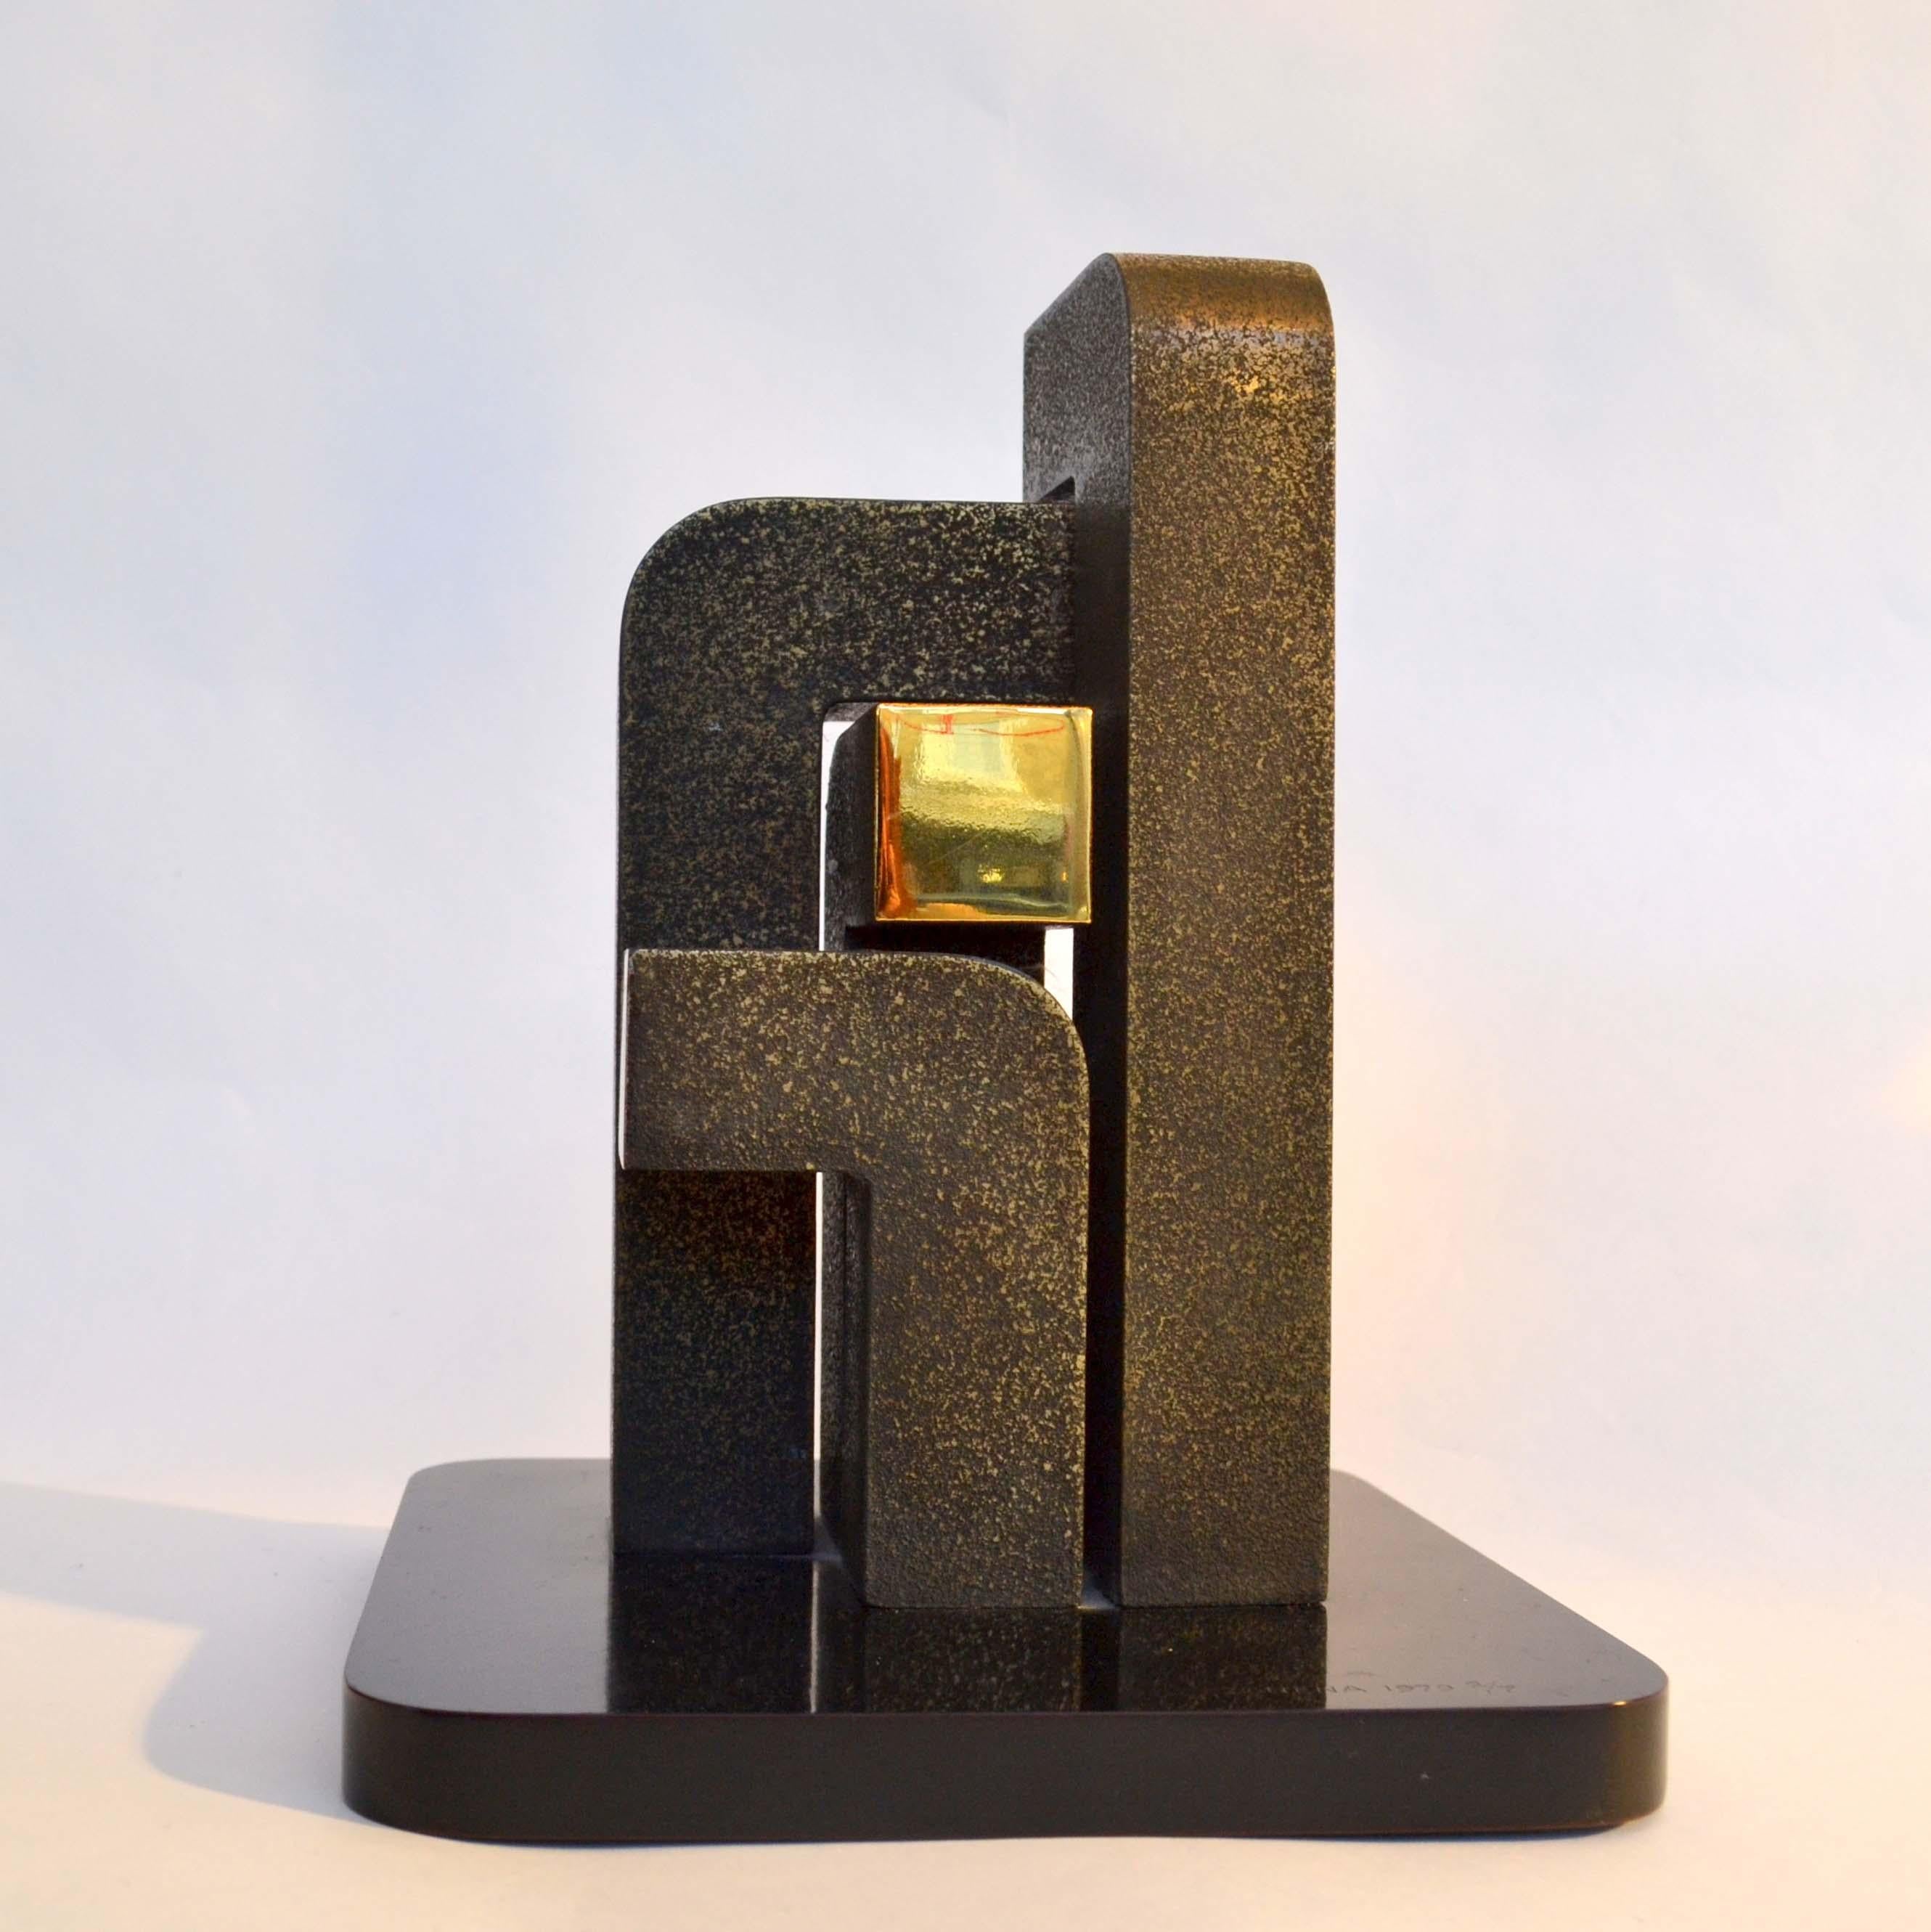 Abstract Geometric Minimalist Bronze Sculpture by Zonena 1979 in Limited Edition 6